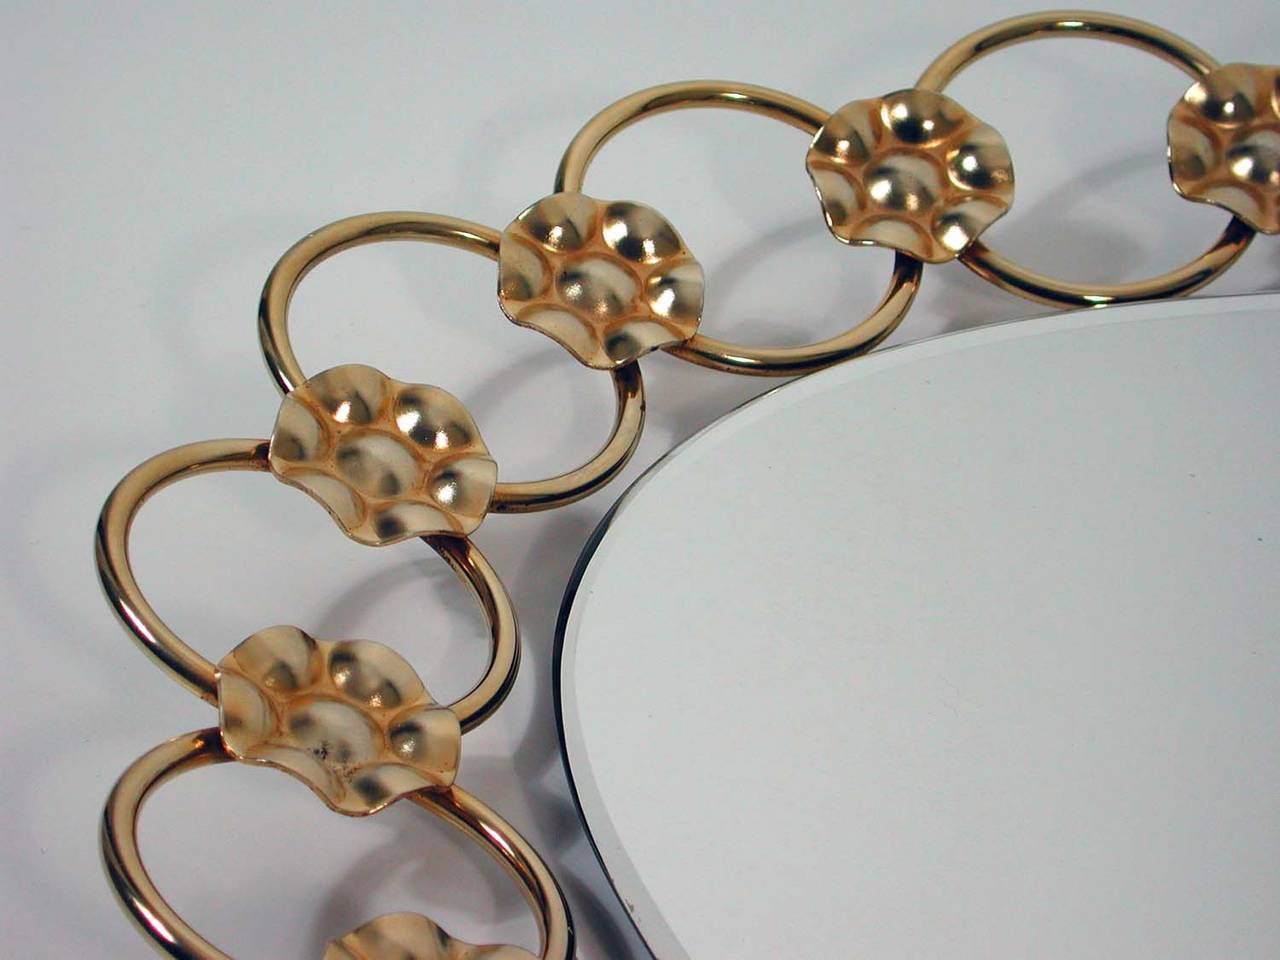 Midcentury Italian Floral Brass Wall Mirror, 1950s (Messing)